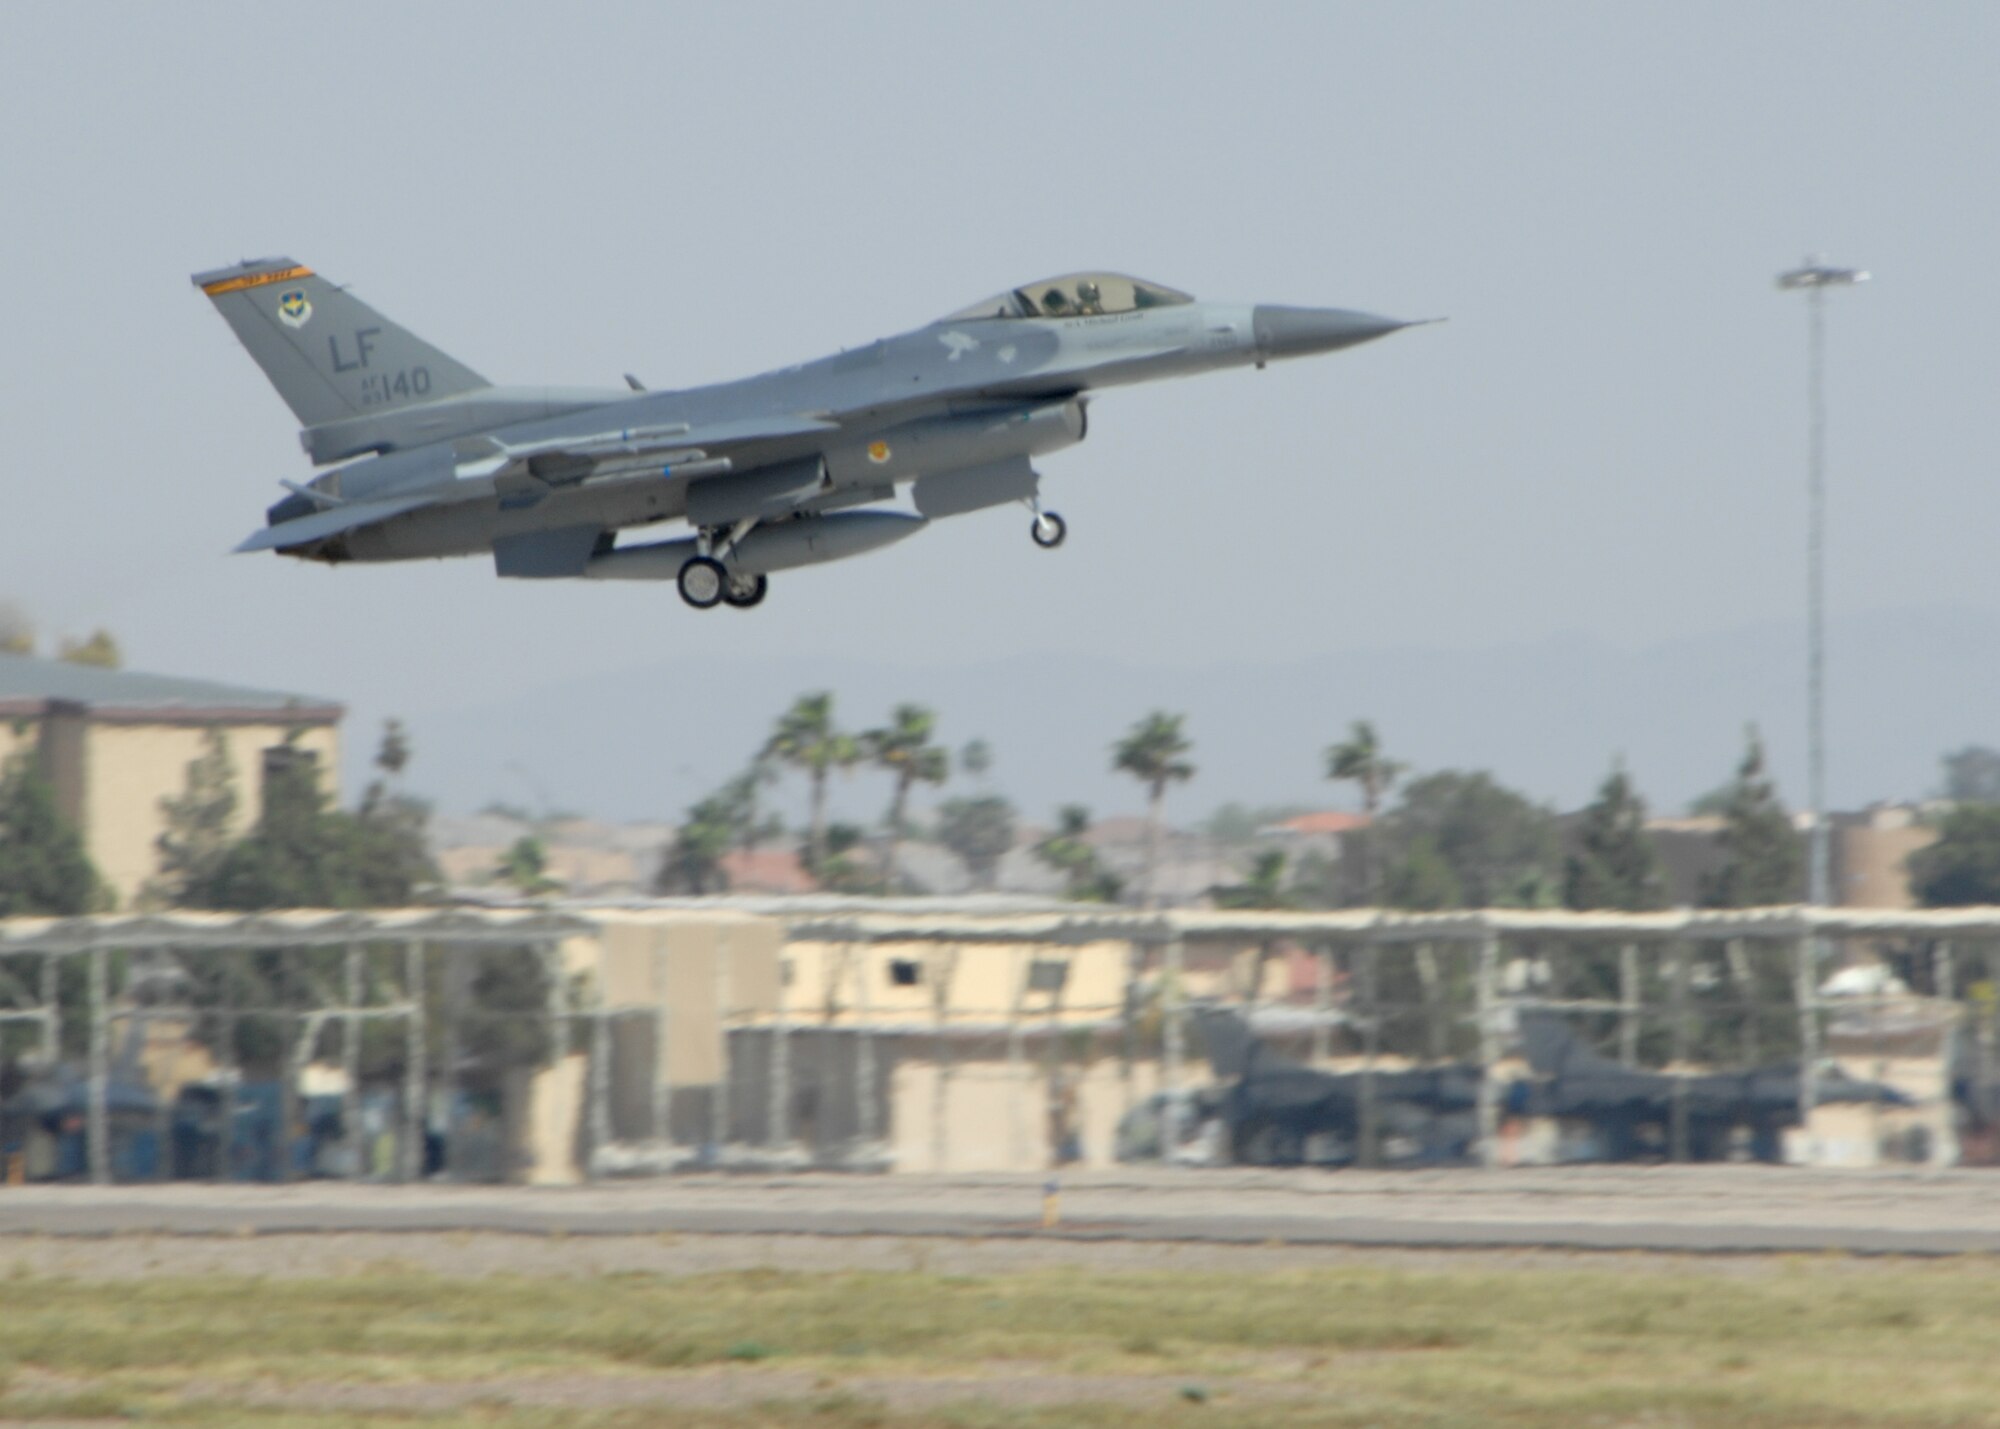 An F-16 from the 61st Fighter Squadron prepares to land after a sortie mission on Apr. 29 here at Luke Air Force Base, Ariz.  (U.S. Air Force photo/Tech. Sgt. Raheem Moore)